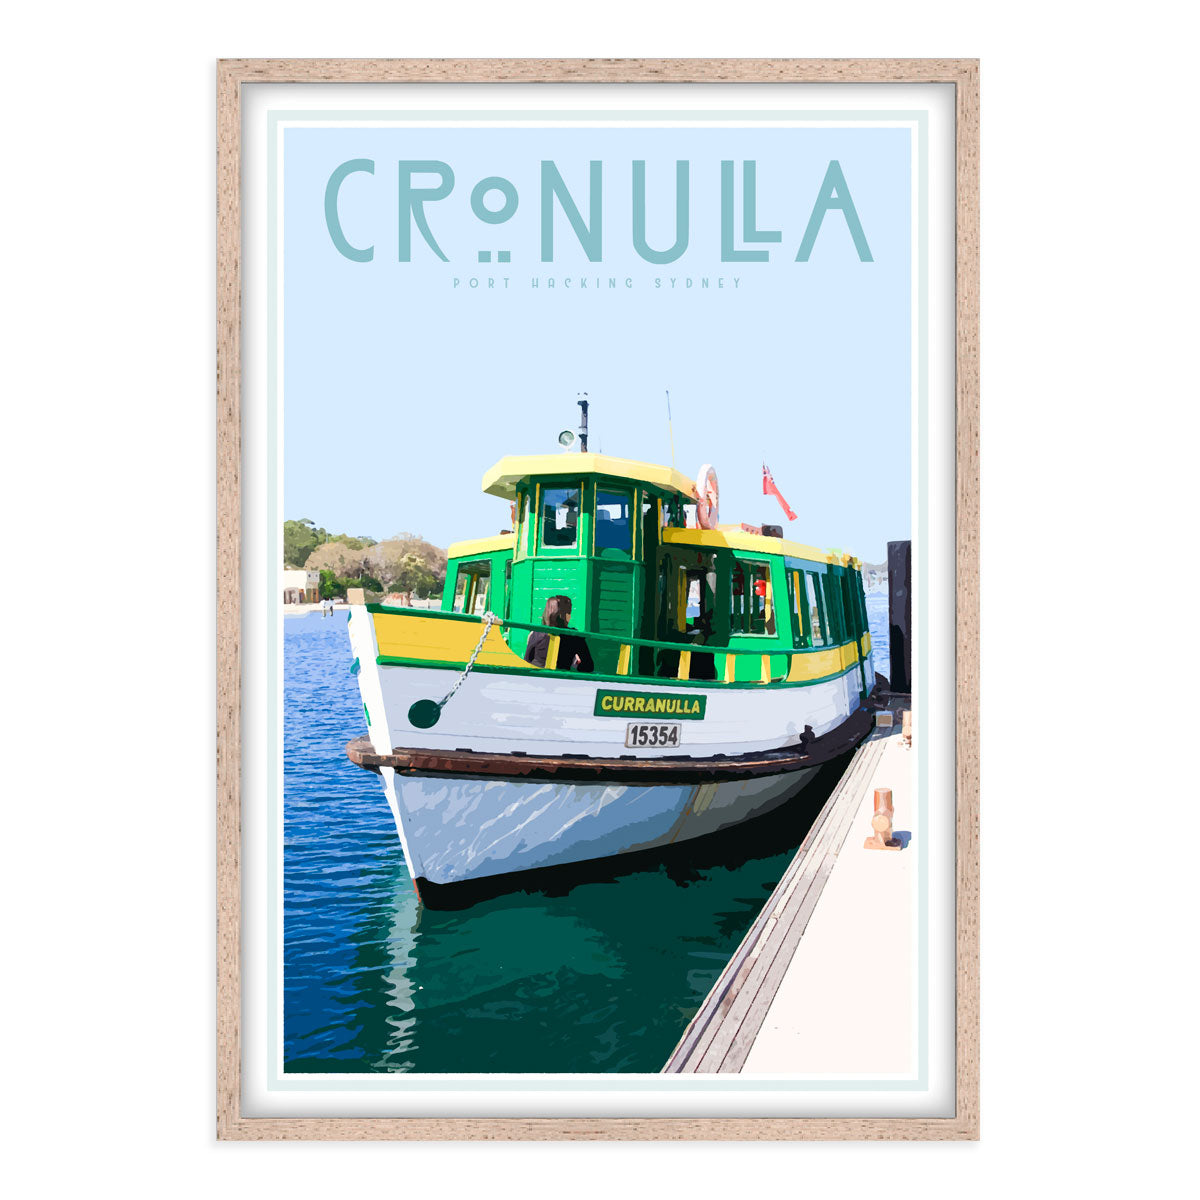 Cronulla ferry vintage style travel print, interior favourite, designed by places we luv